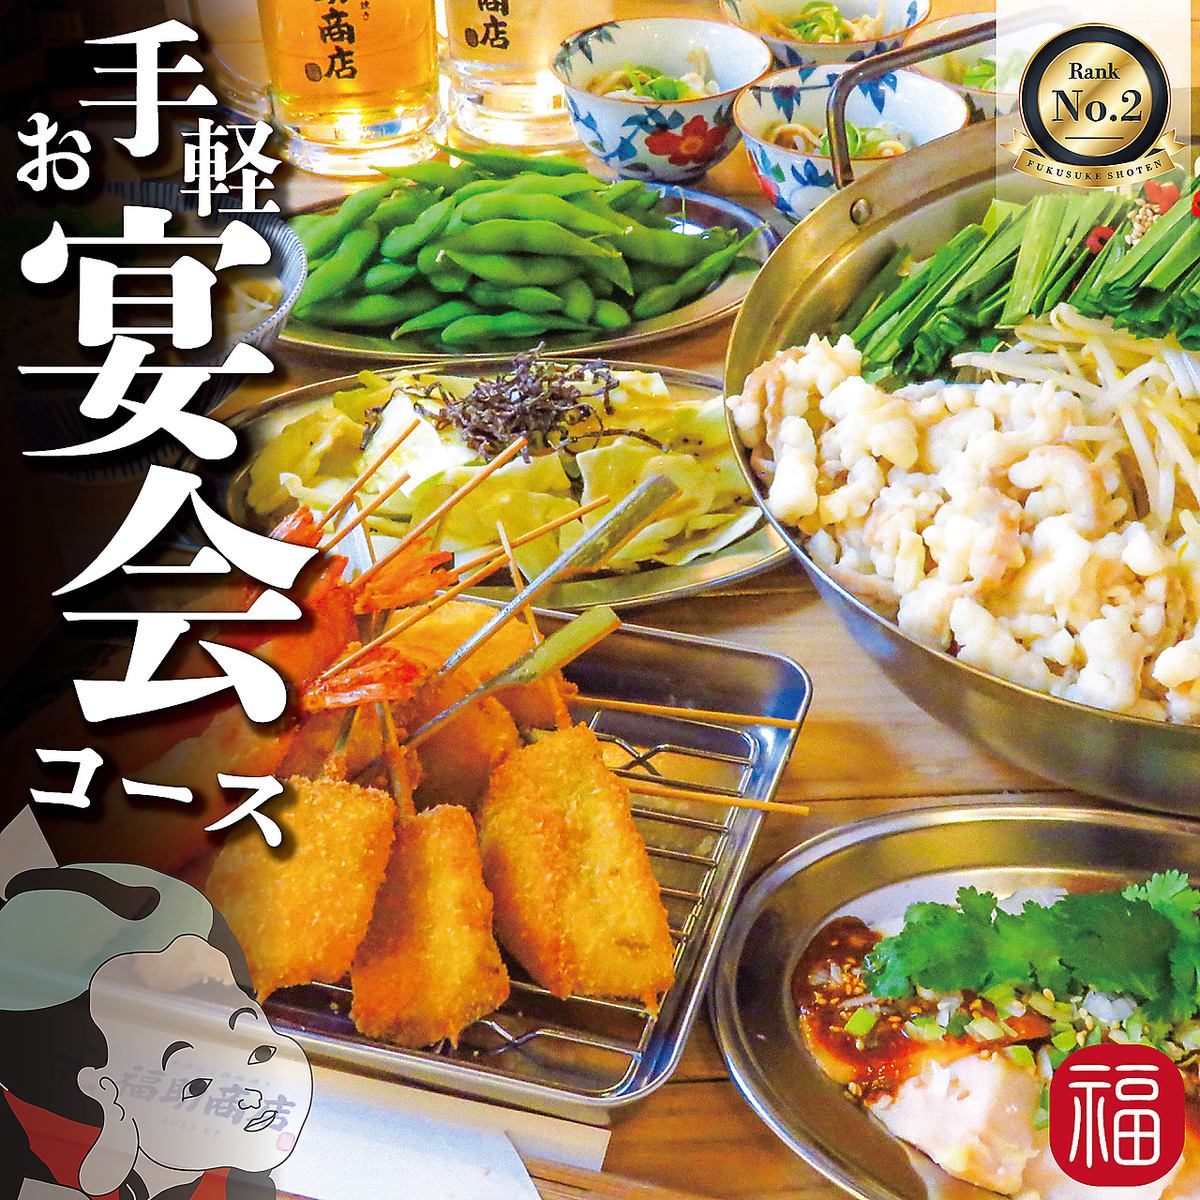 Up to 30 people ◆ Banquet course with all-you-can-drink from 3,500 yen! 500 yen off from Sunday to Thursday